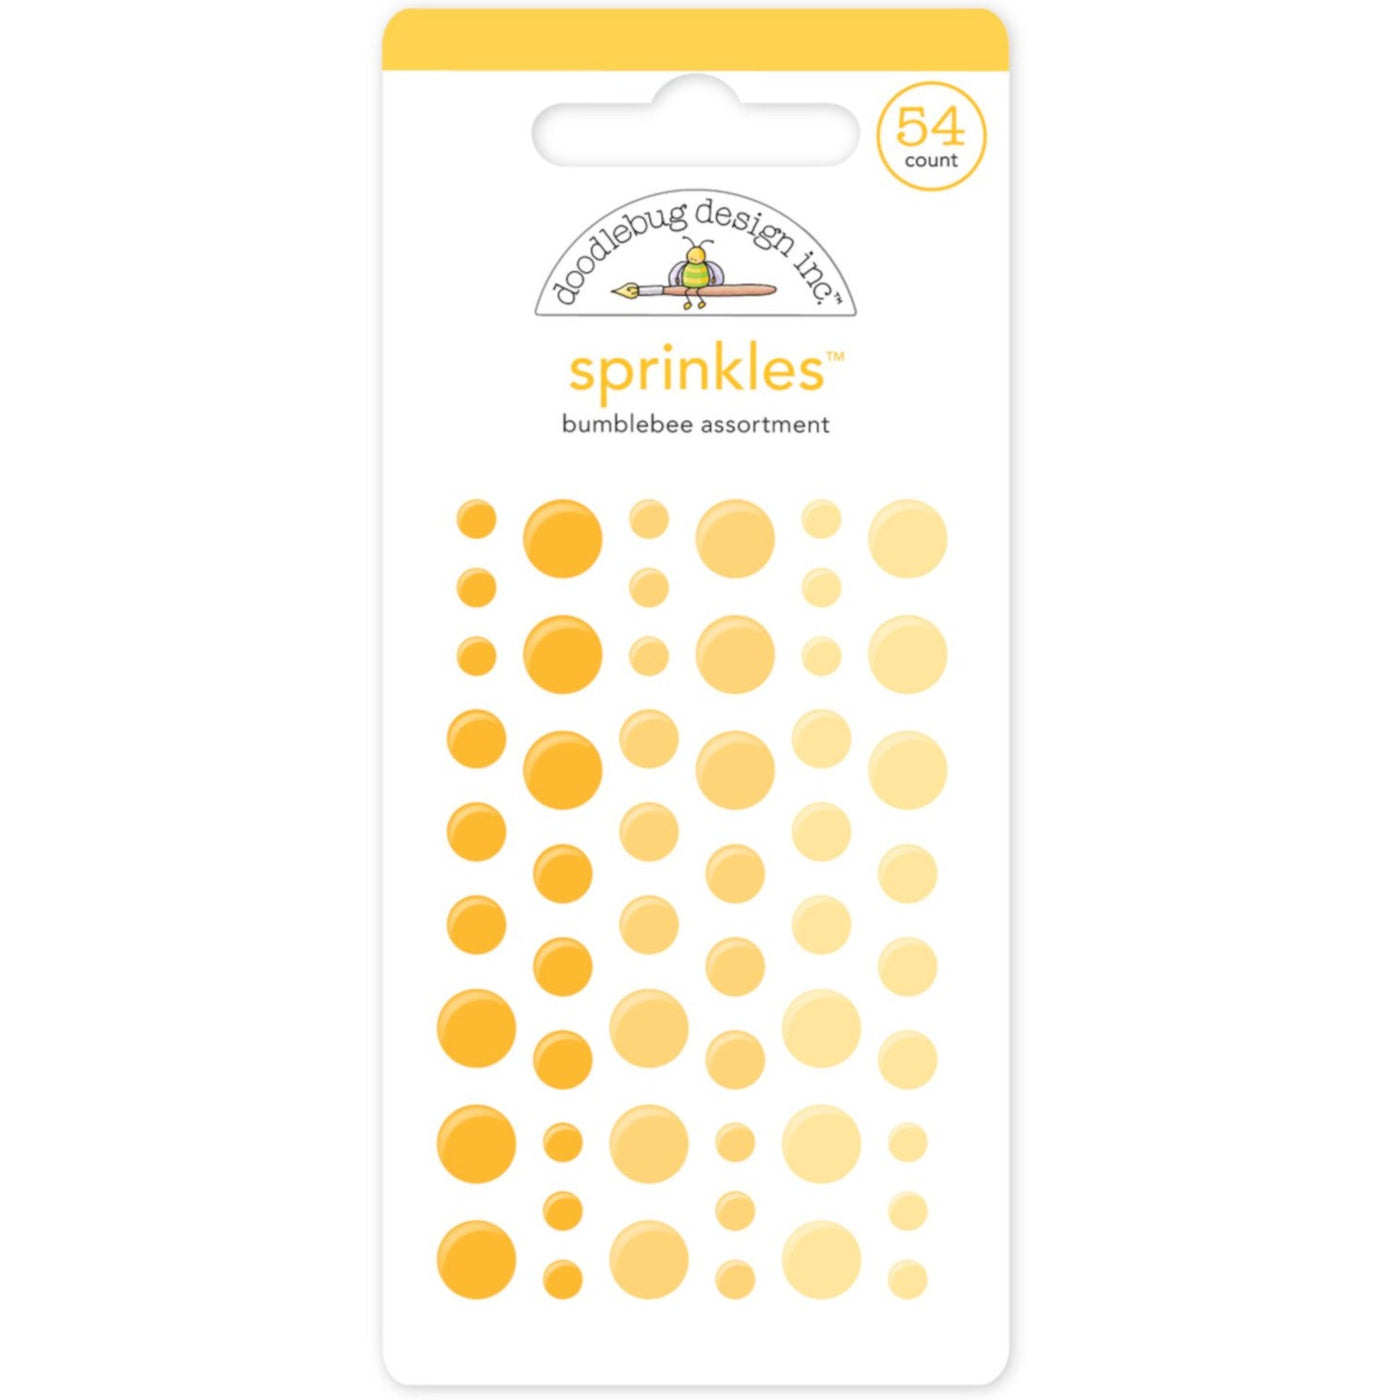 BUMBLEBEE Sprinkles - 54 enamel dots in 3 shades of yellow from Doodlebug Design